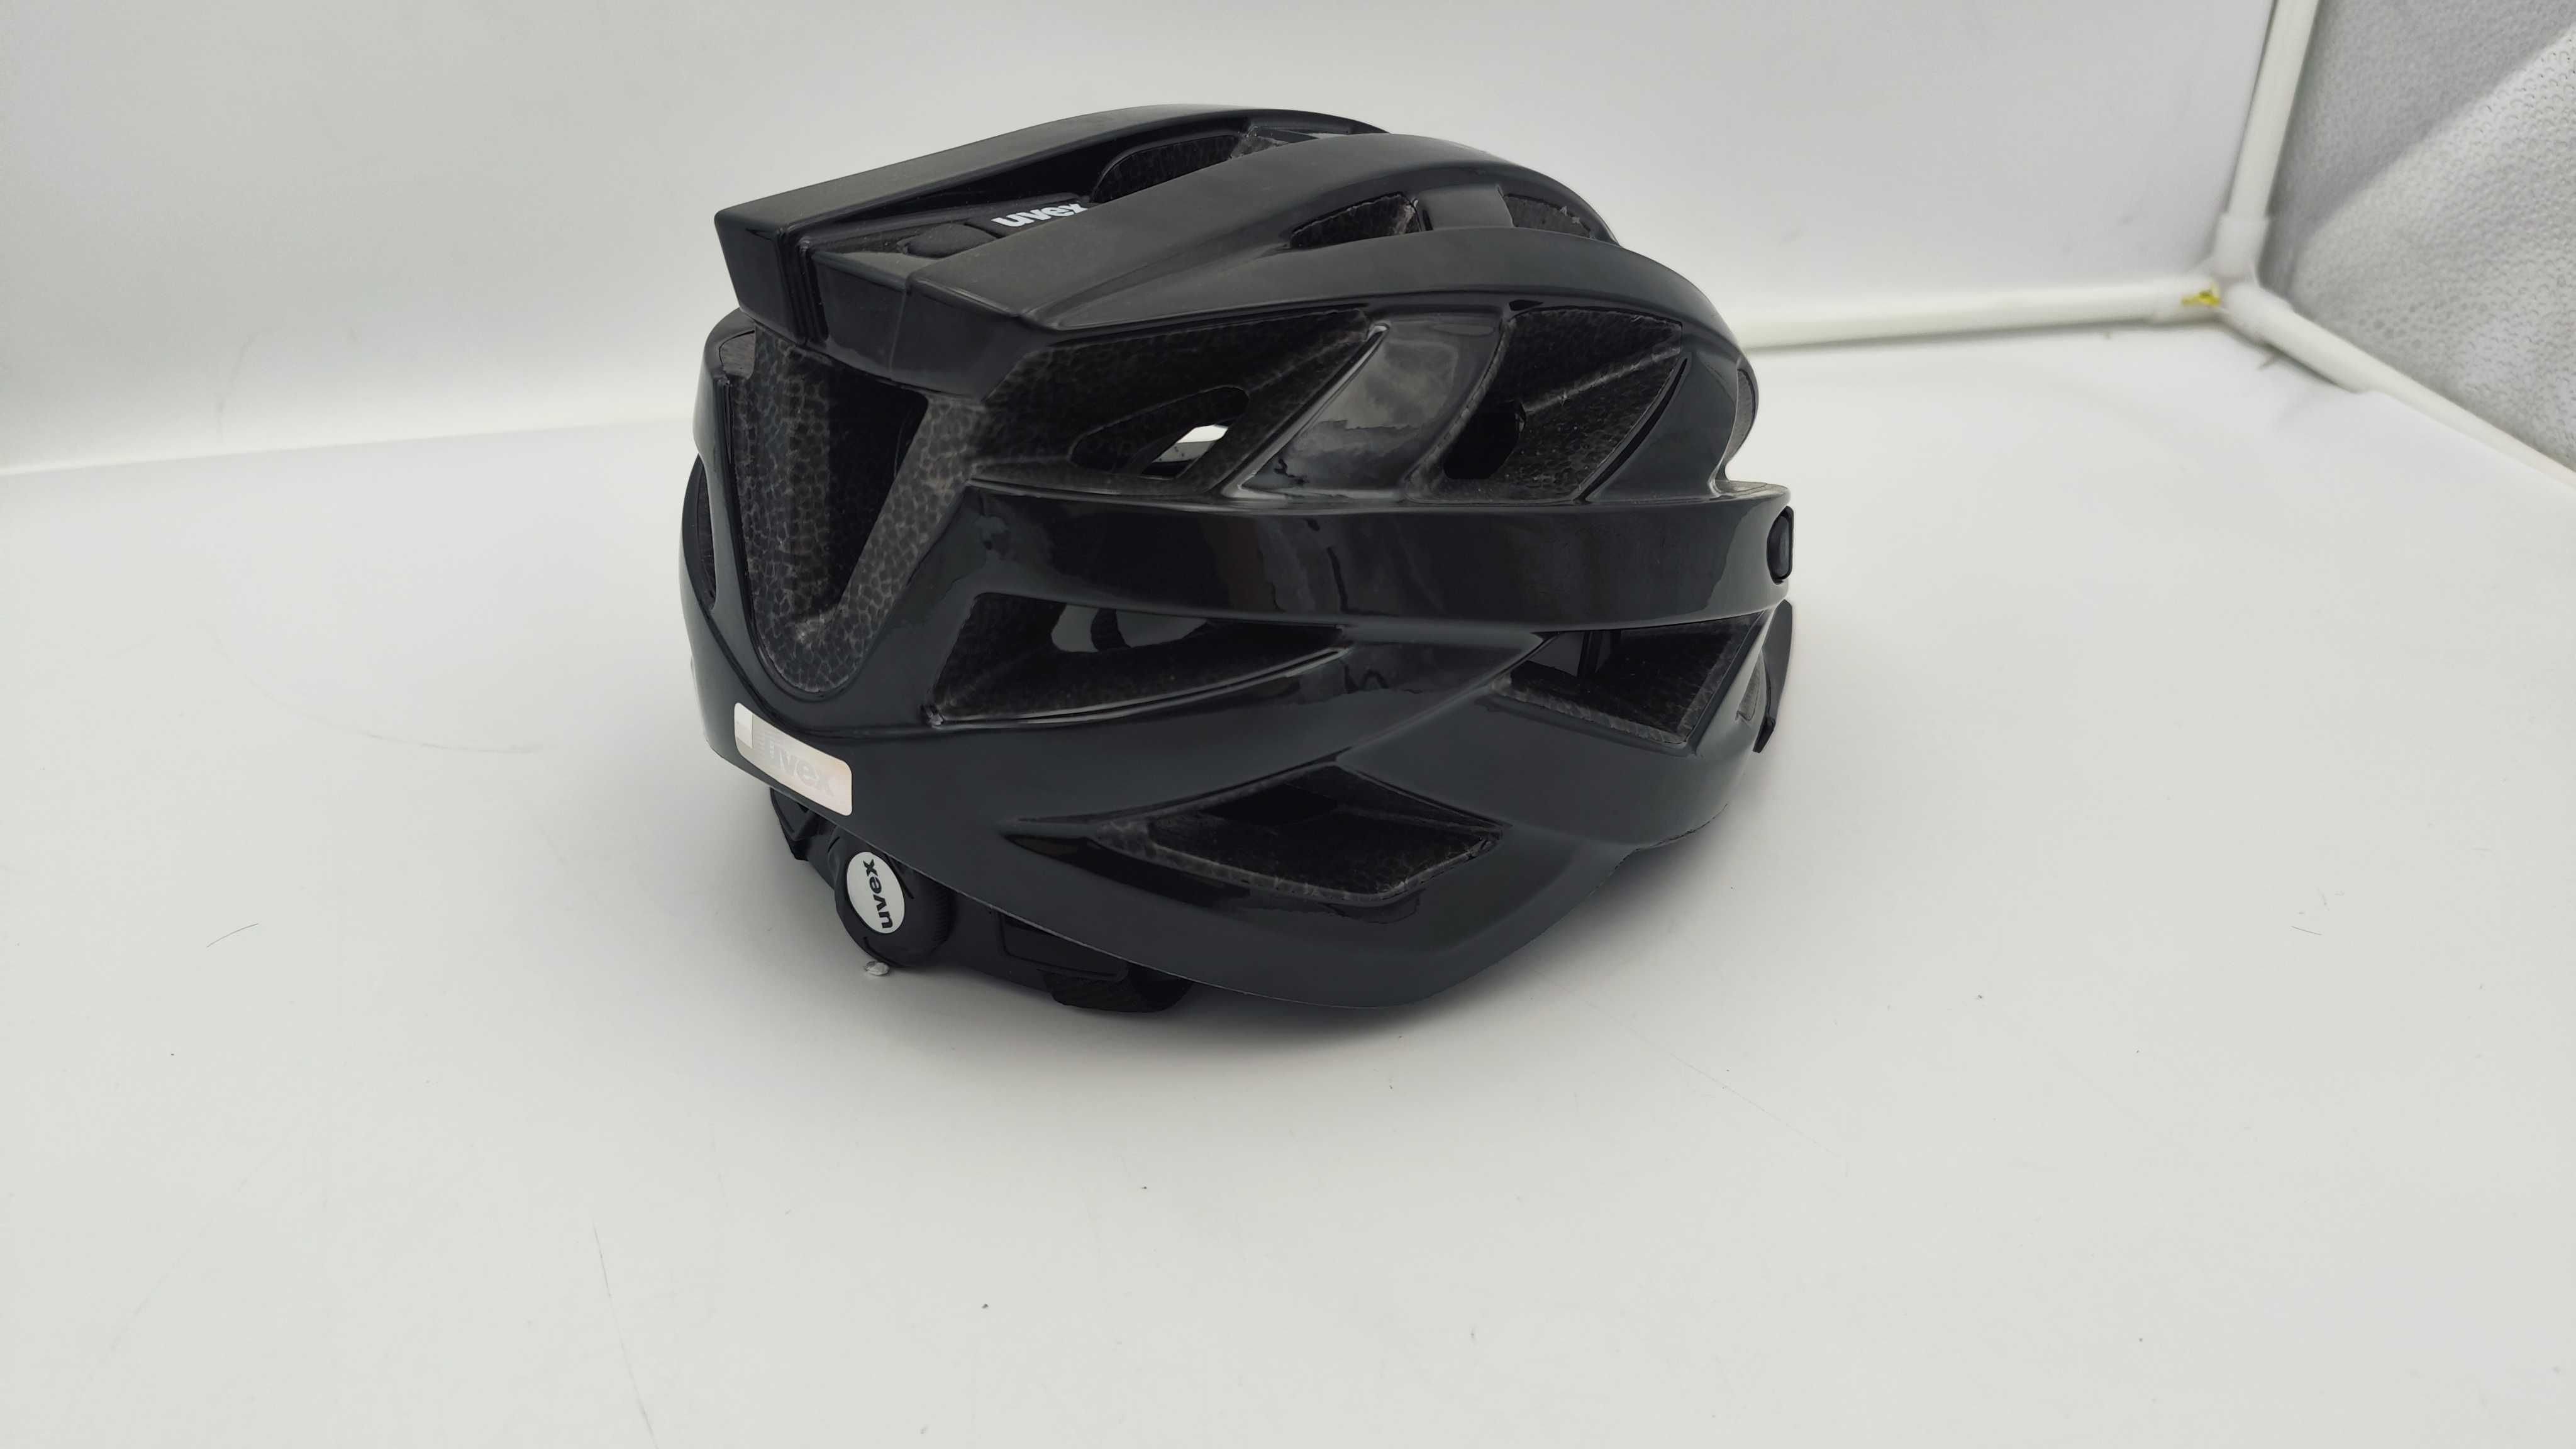 Kask rowerowy Uvex I-VO r.52-57 cm (D45)